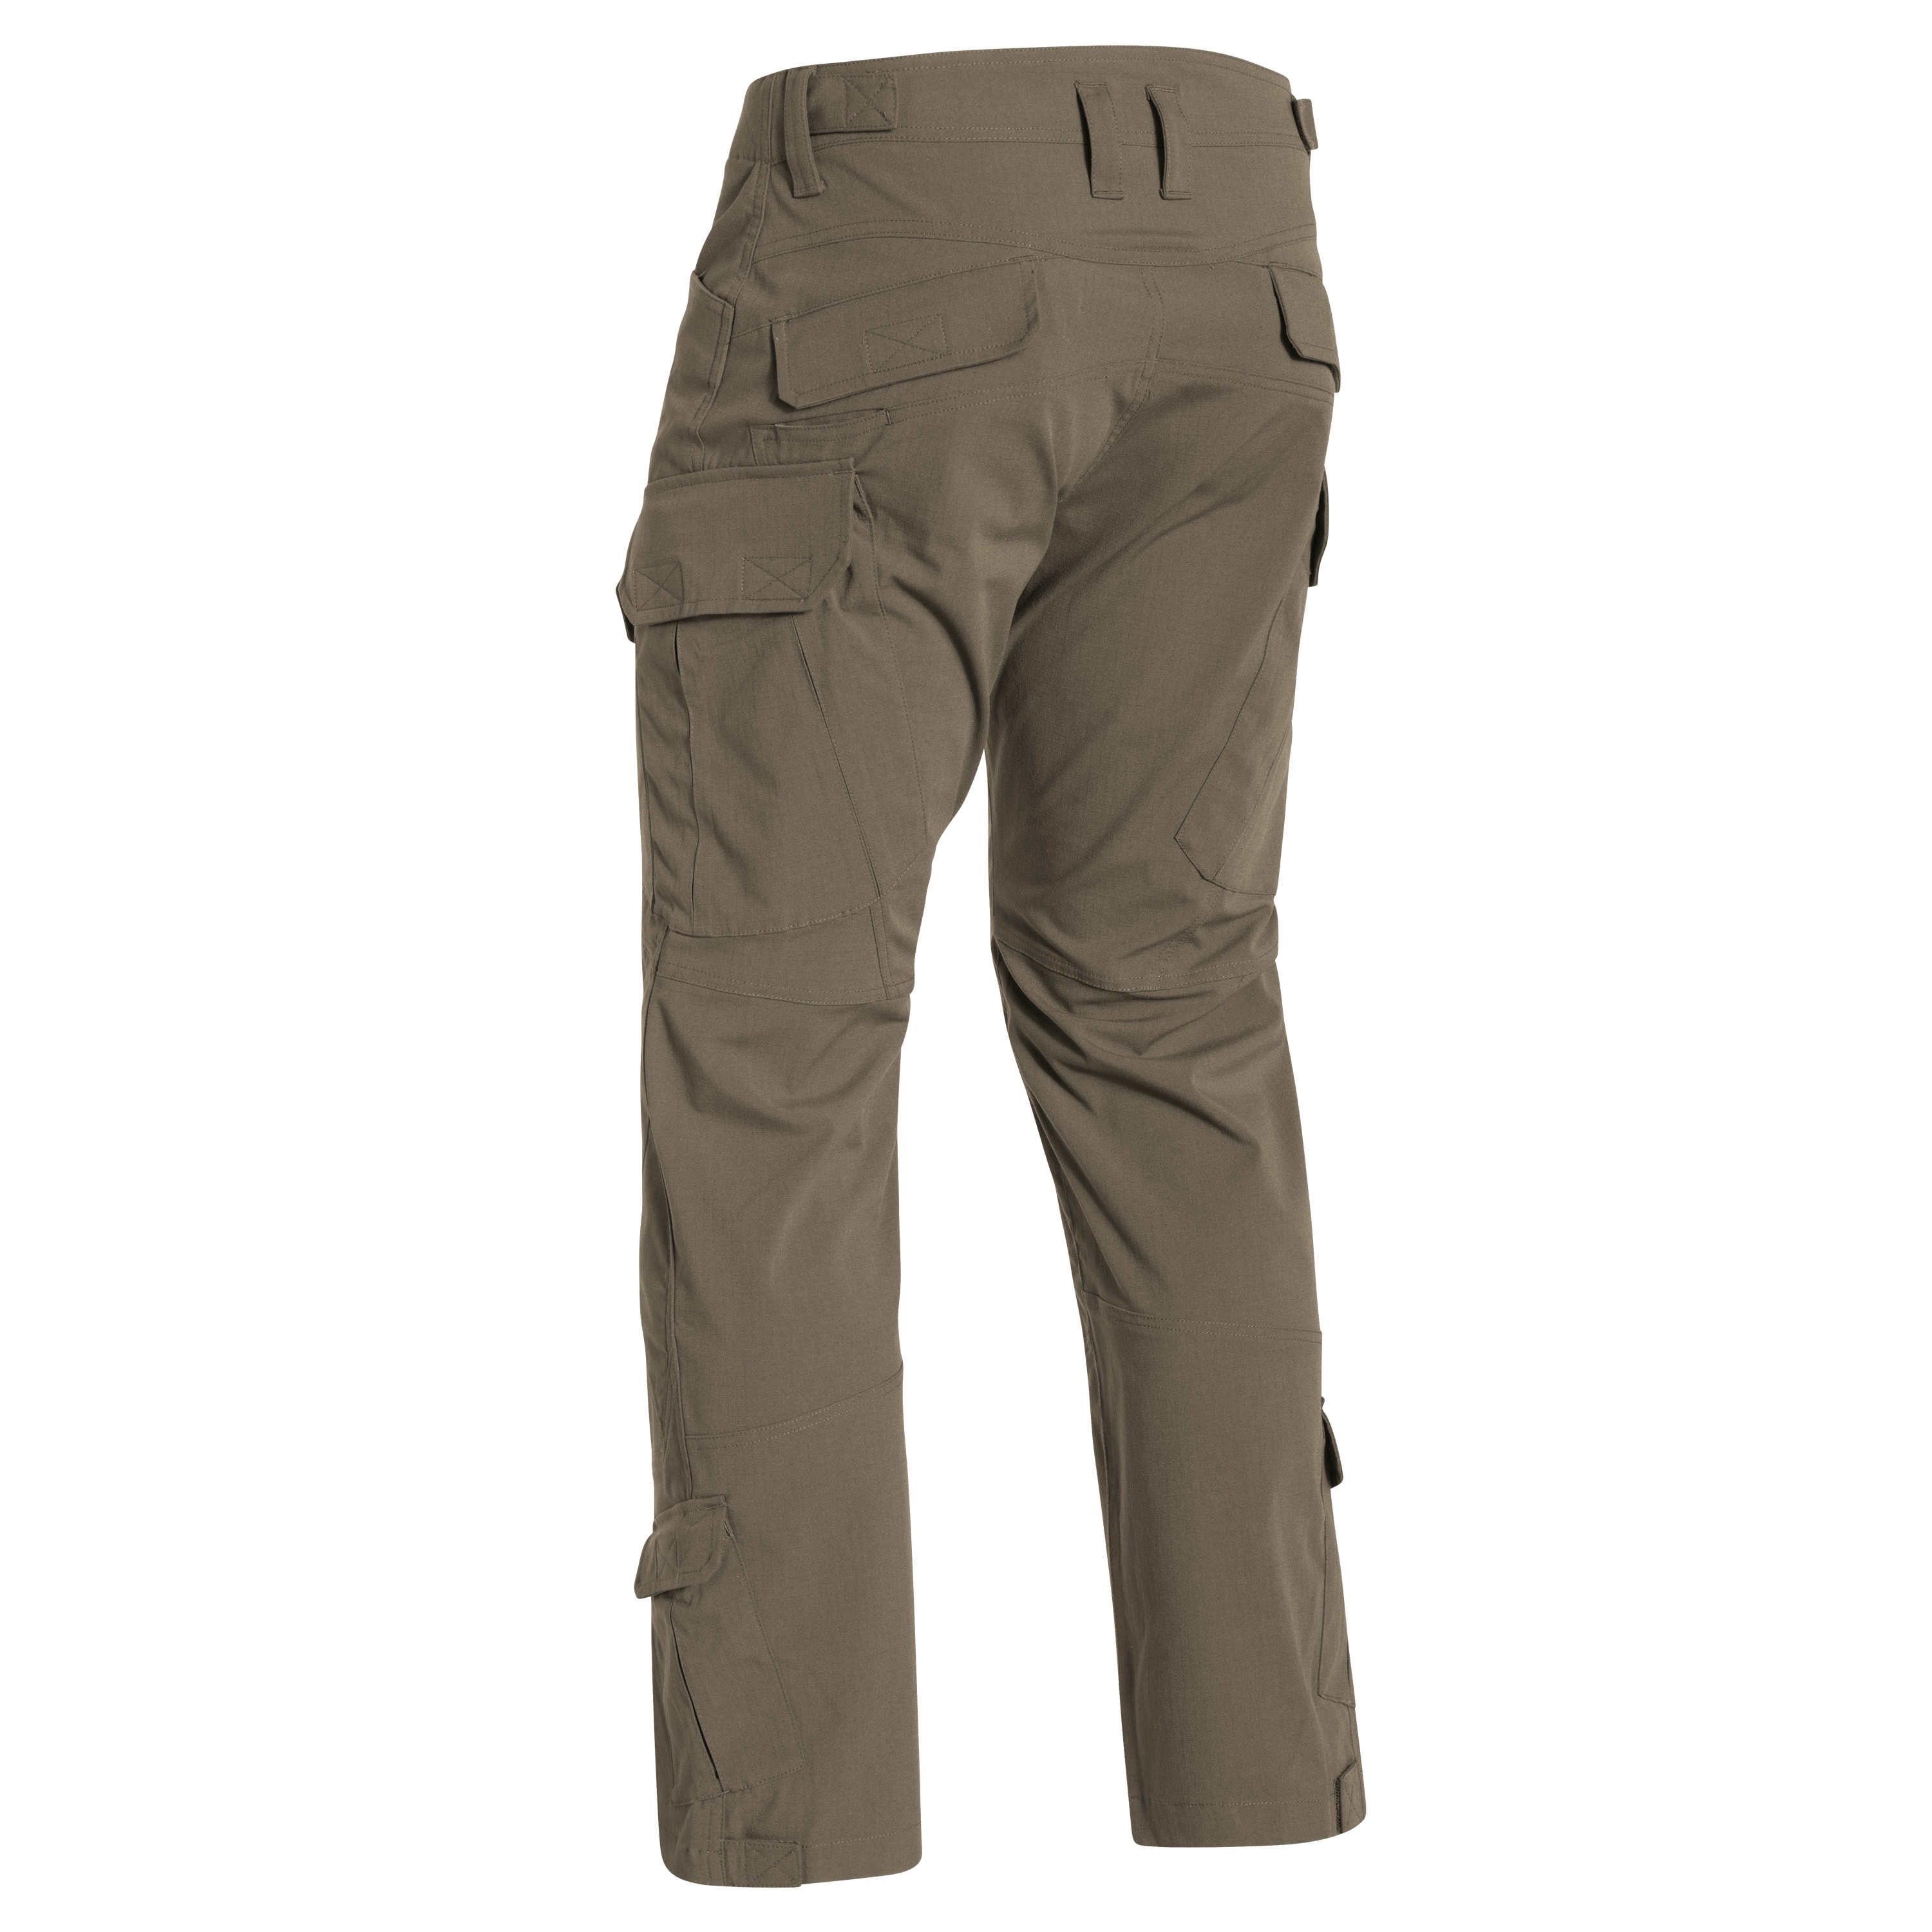 Under Armour Womens Tactical Patrol Pant - UA Loose-Fit Field Duty Cargo  Pants